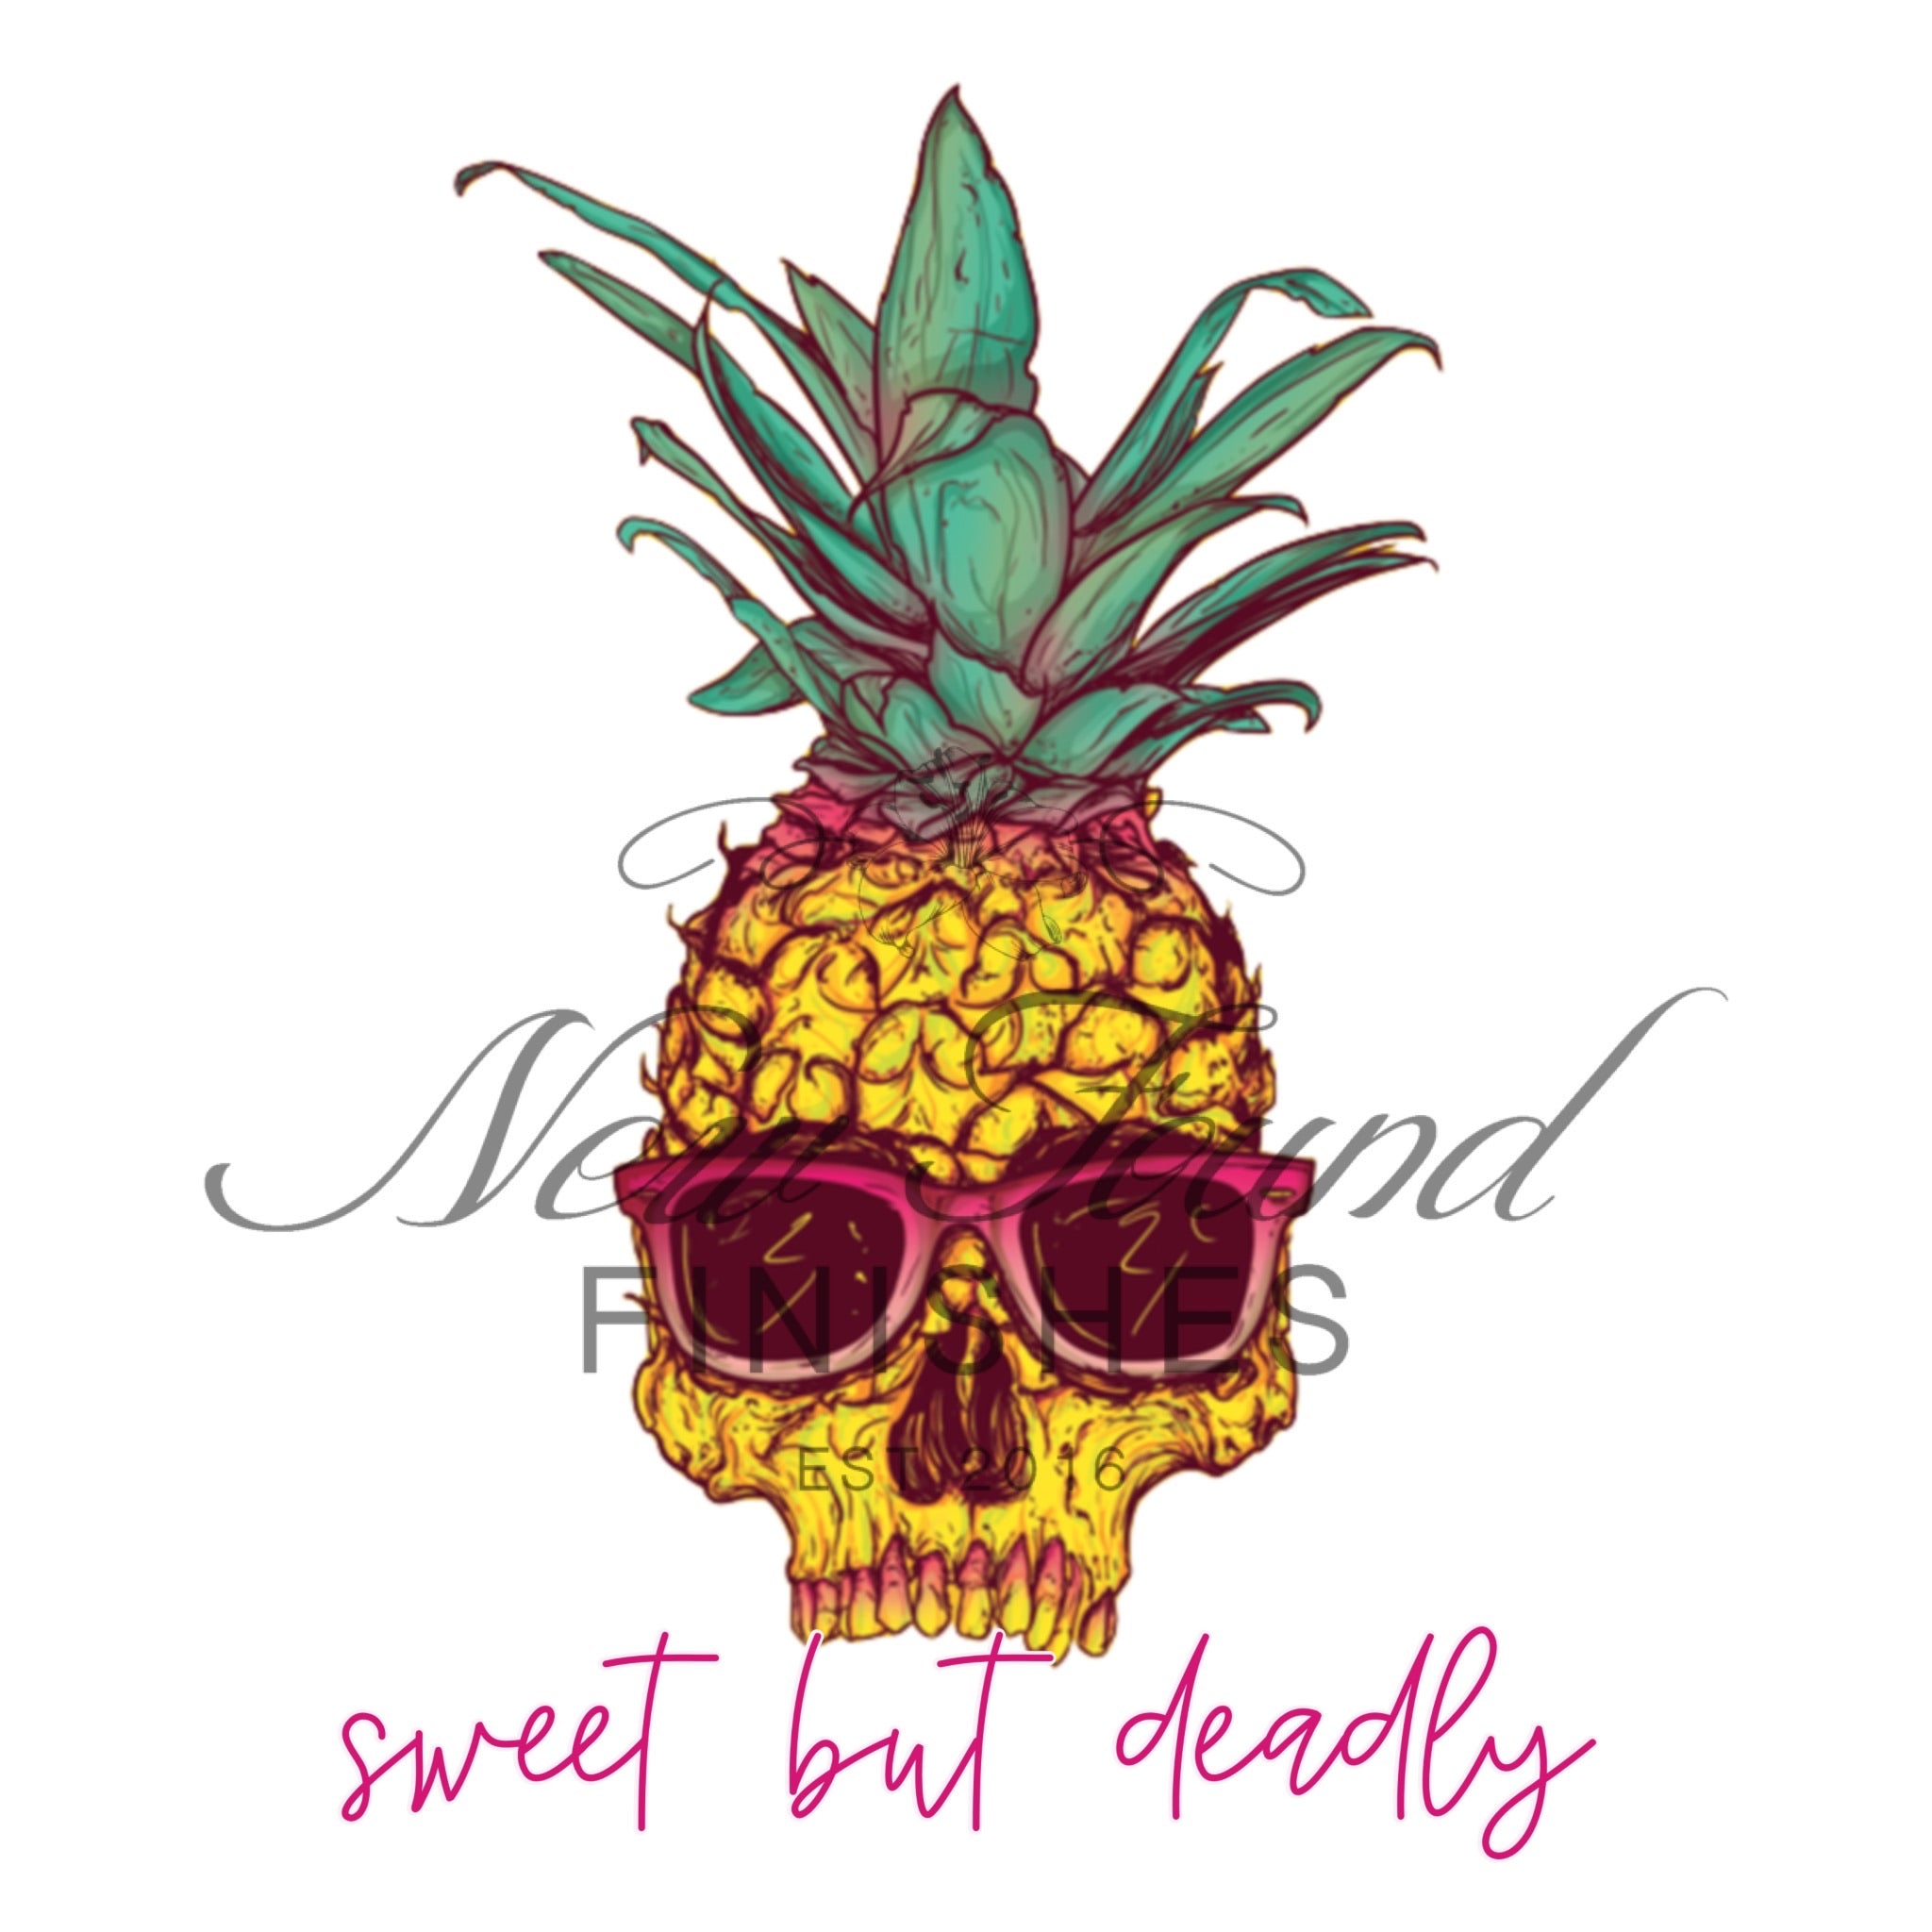 Sweet but deadly